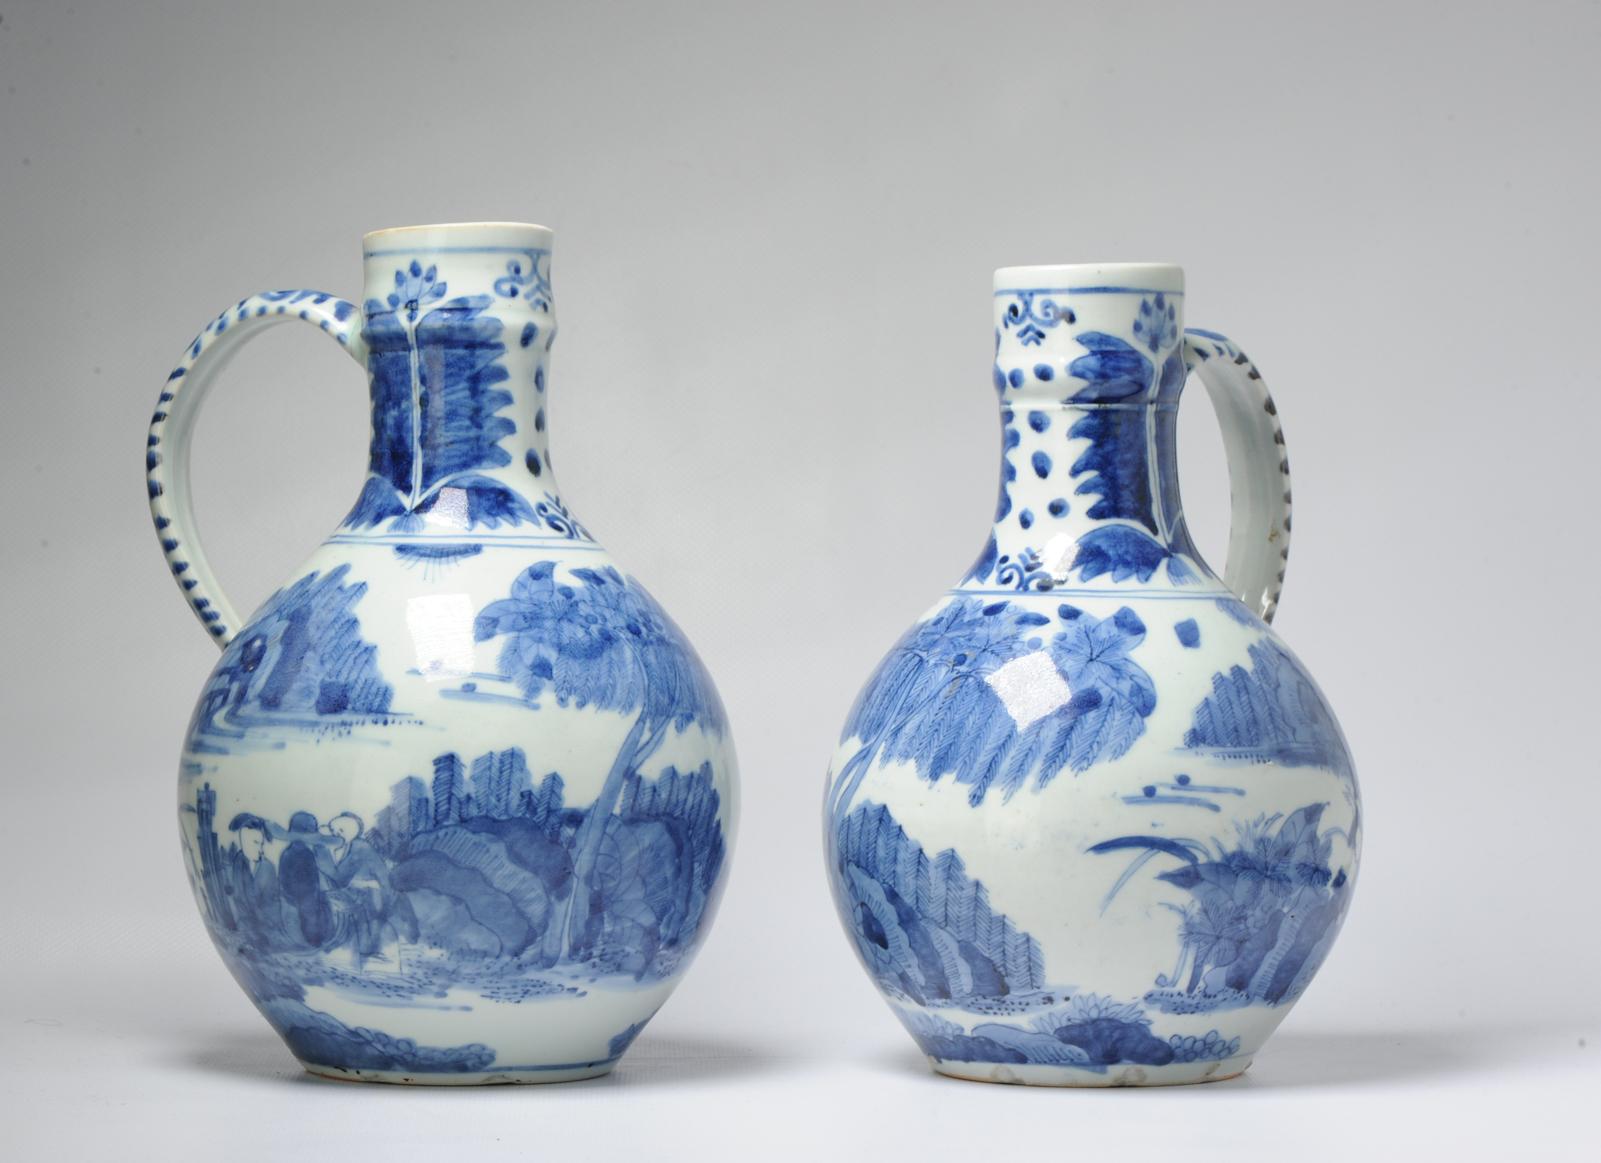 Description
Sharing with you a very nice examples of the Edo period. Made in Arita late 17th c. With sublime cobalt blue colours and painting. Both with figural landscape scene.

Condition
Jug 1 with hairline around upper handle and frit to rim.